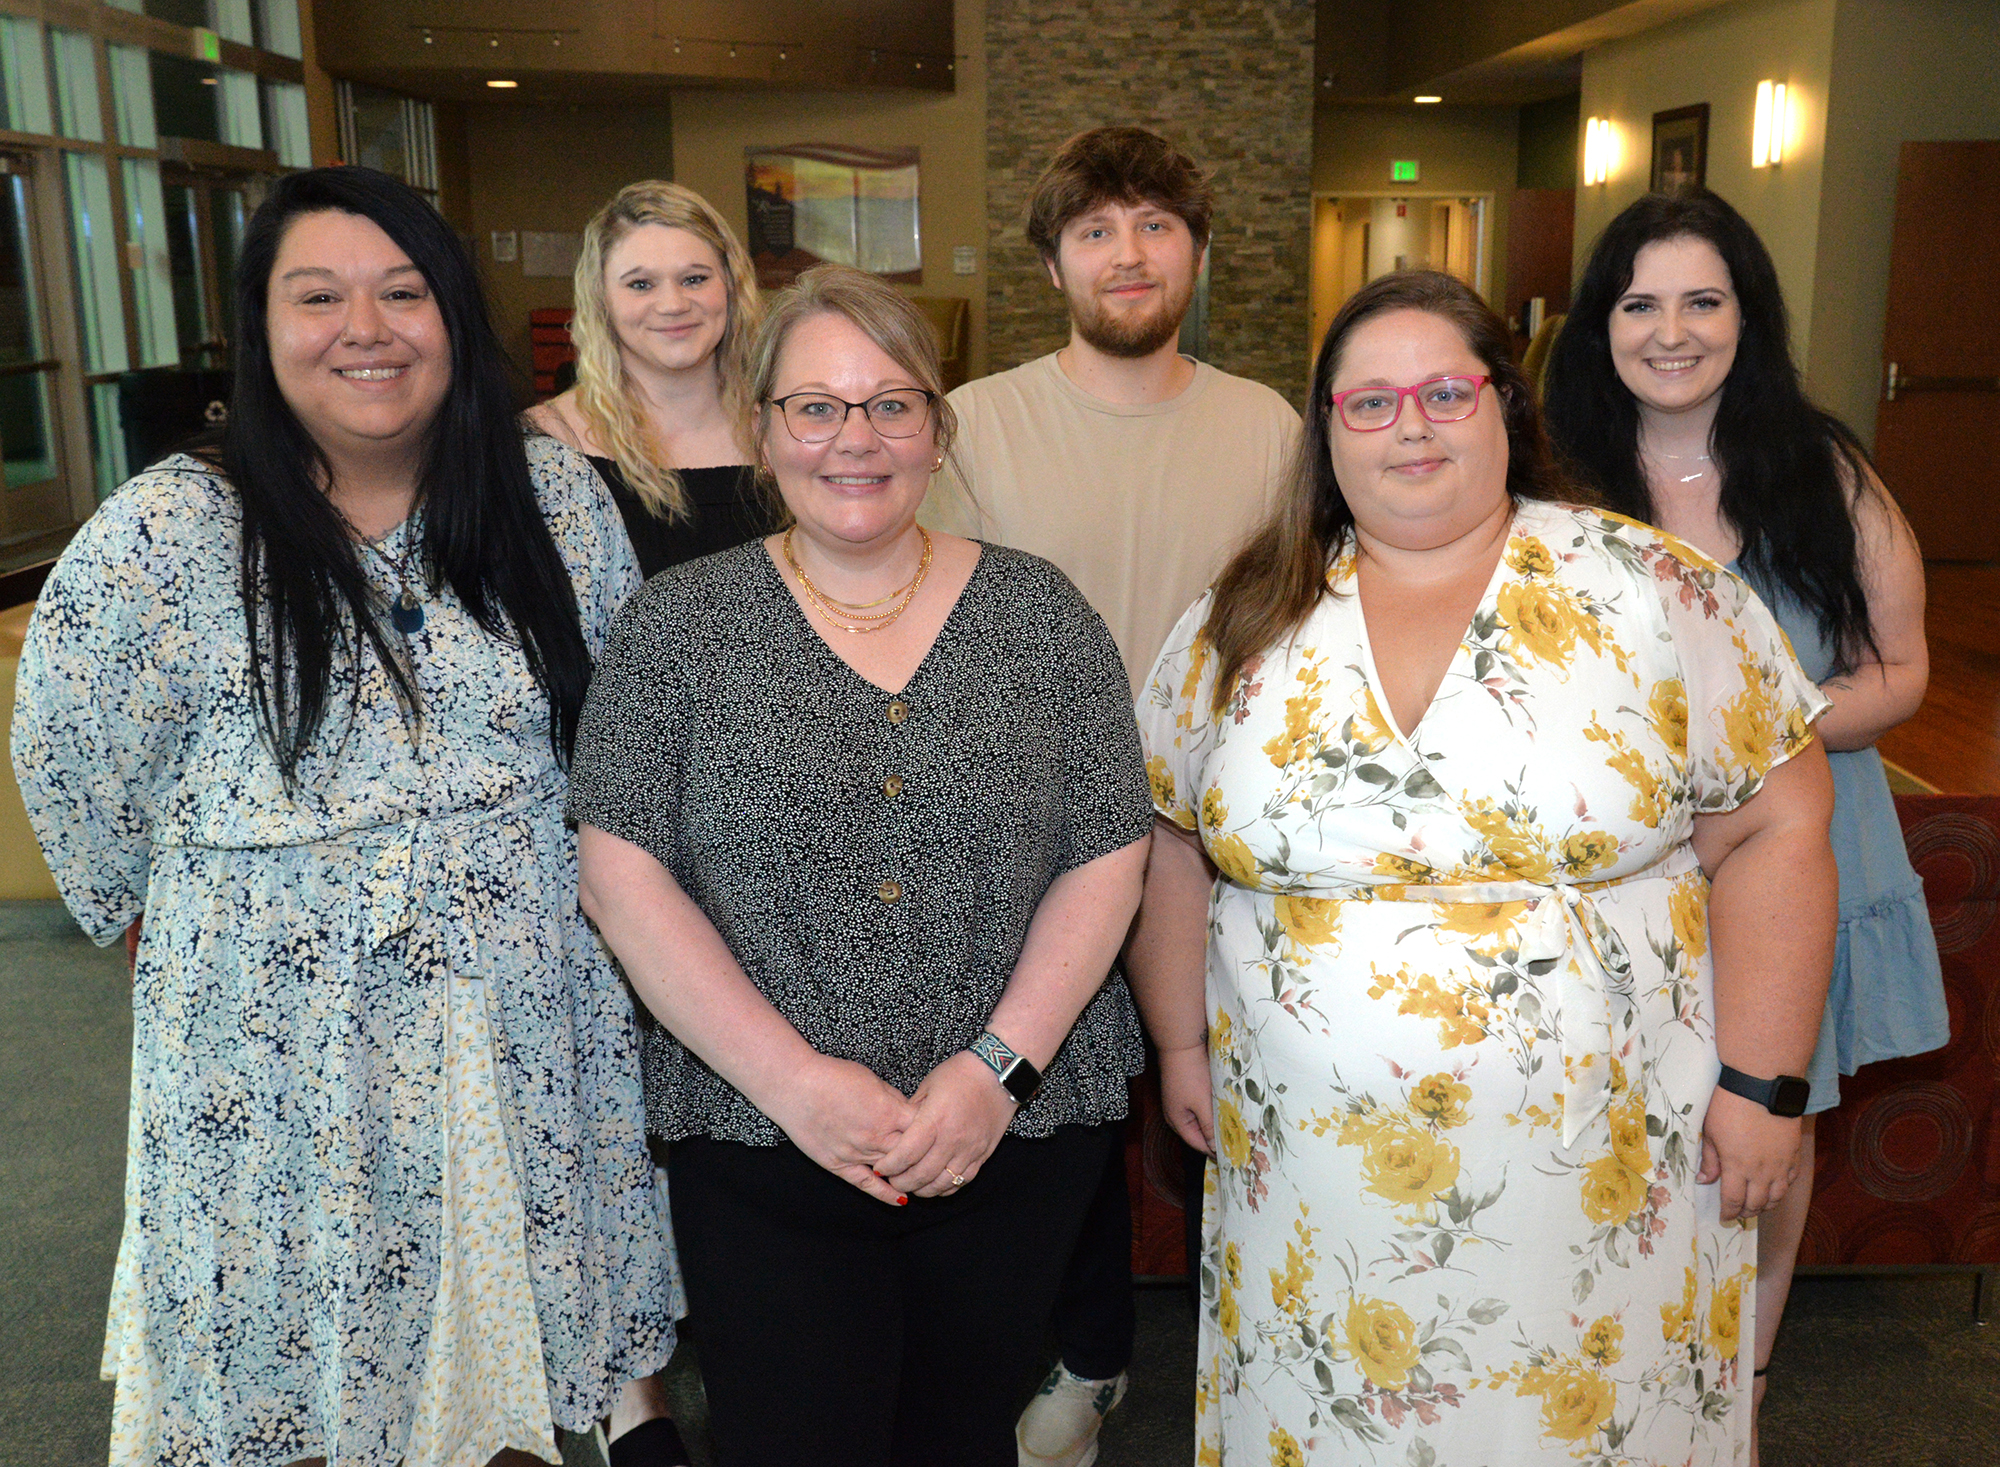 SCC's Medical Assisting grads are shown here with their instructor